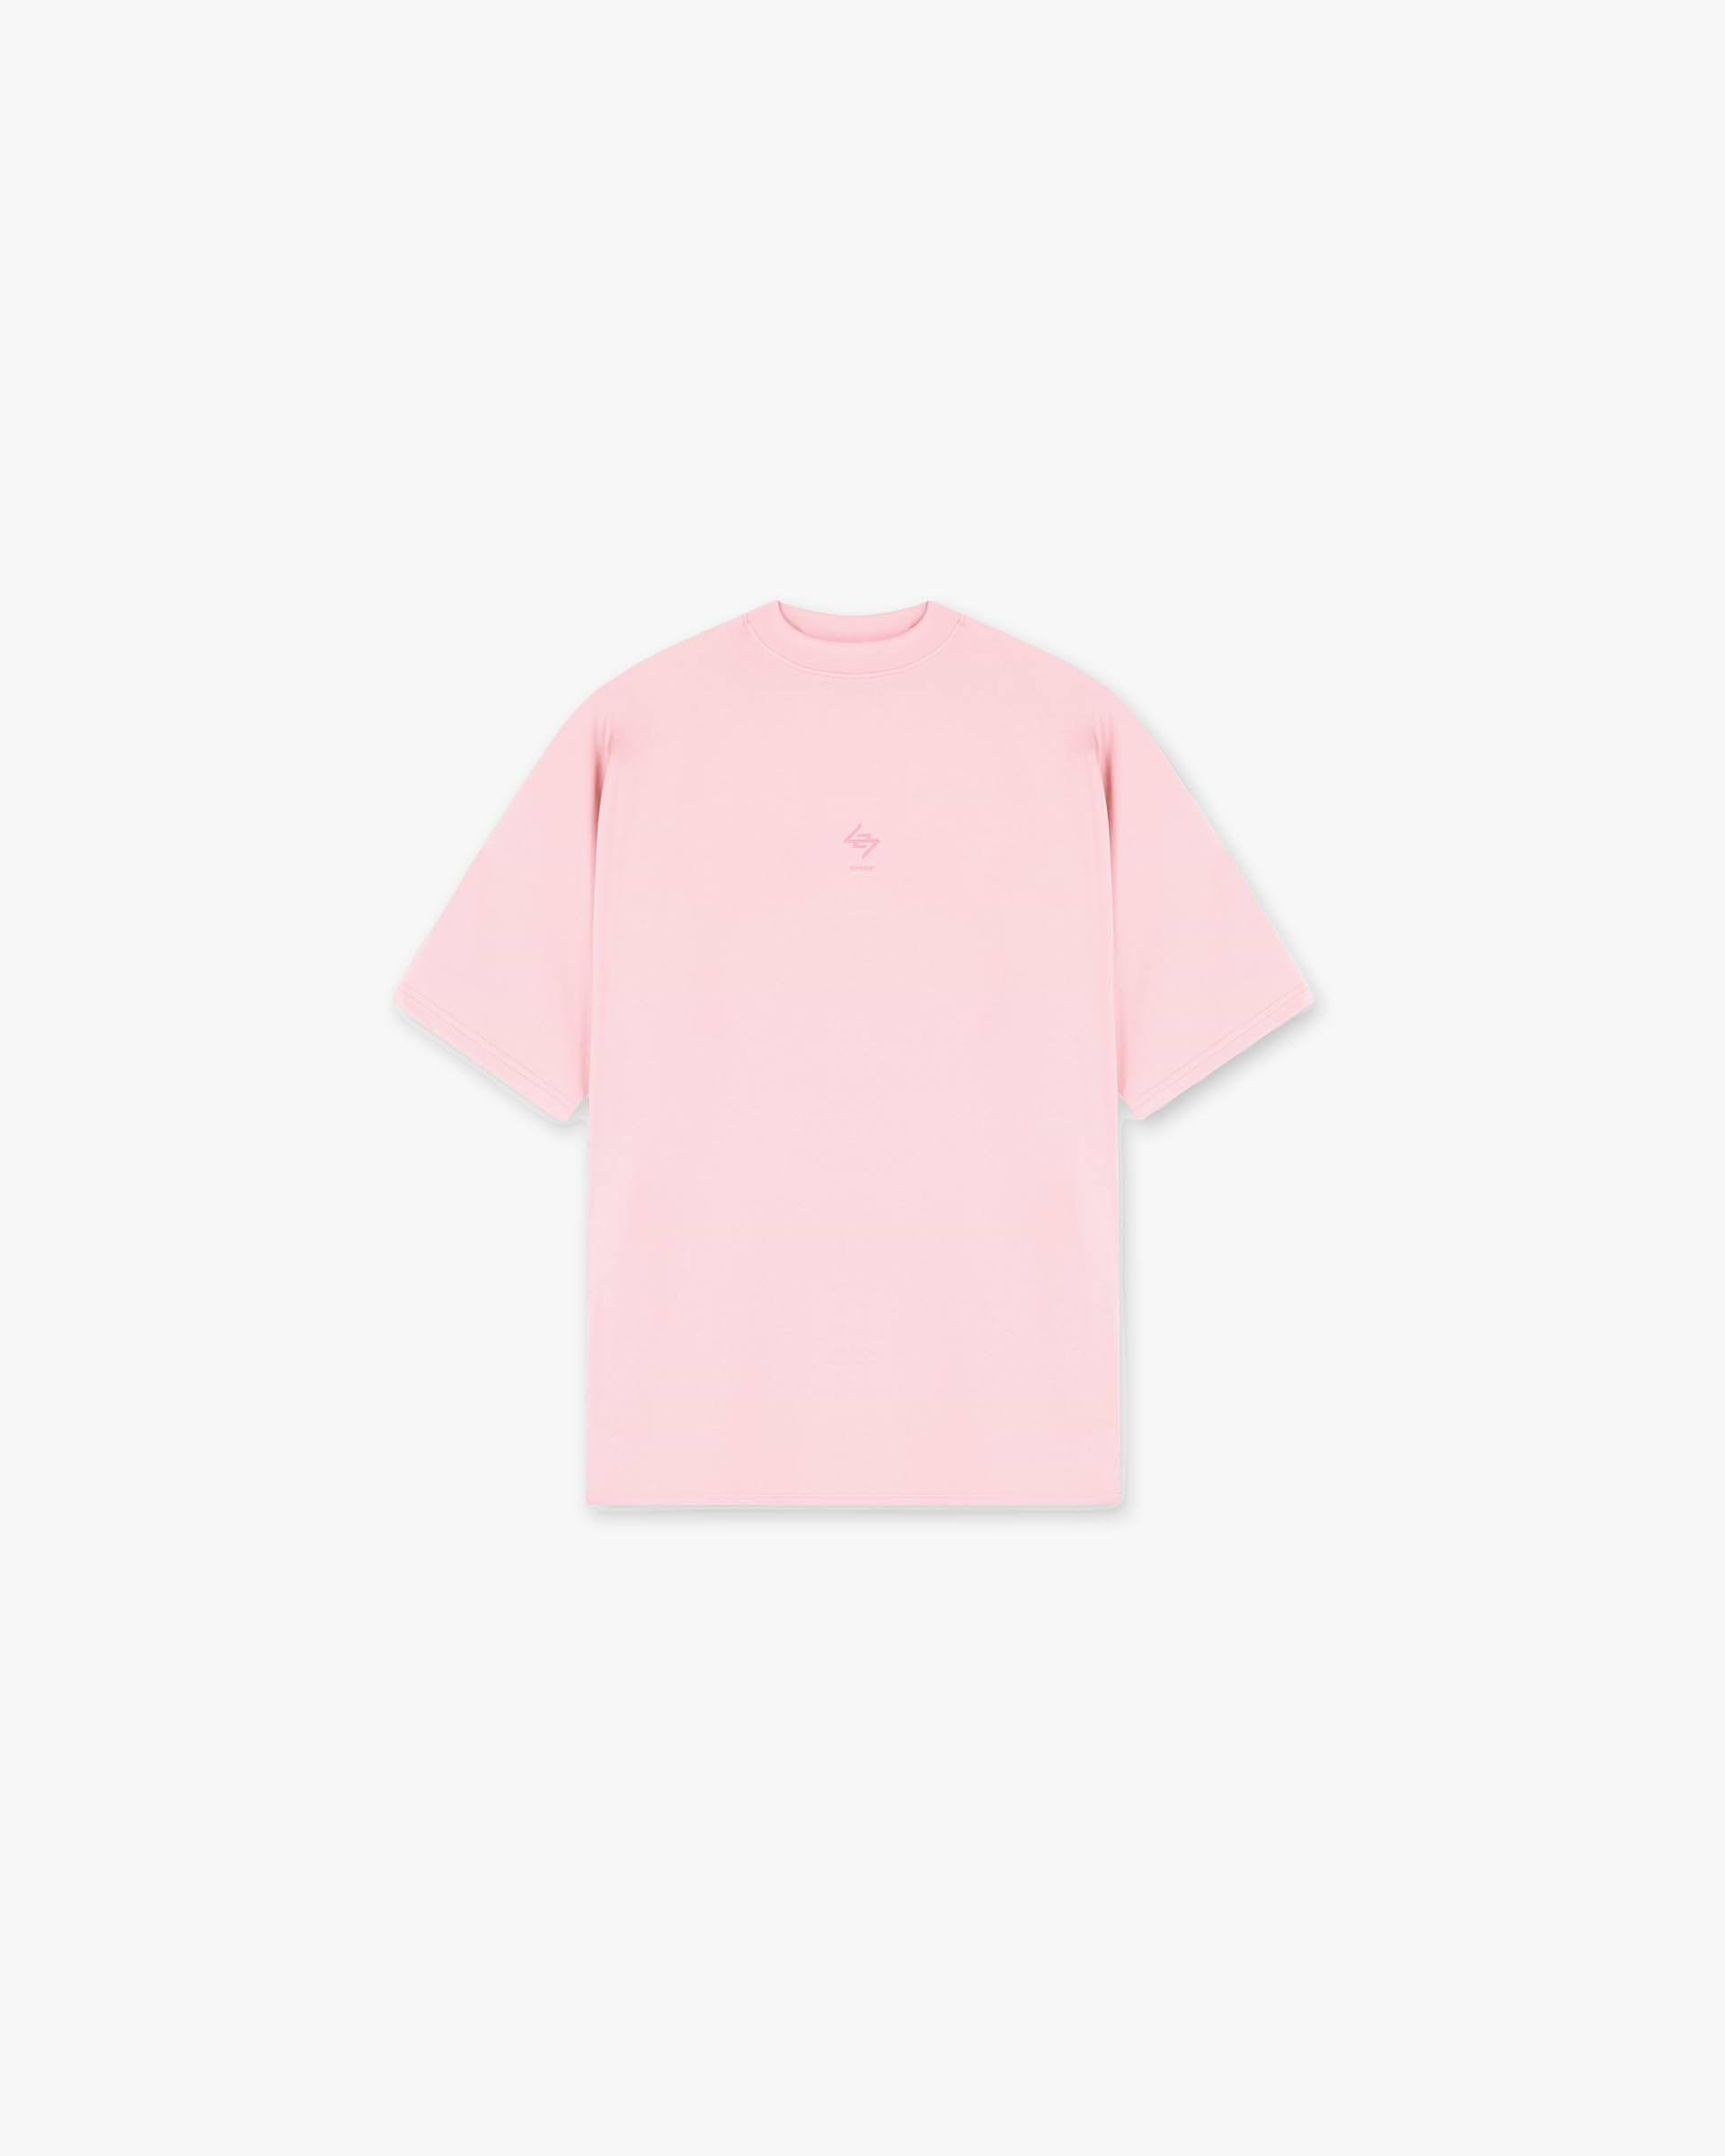 London 247 Oversized T-Shirt - Candy Pink | REPRESENT CLO